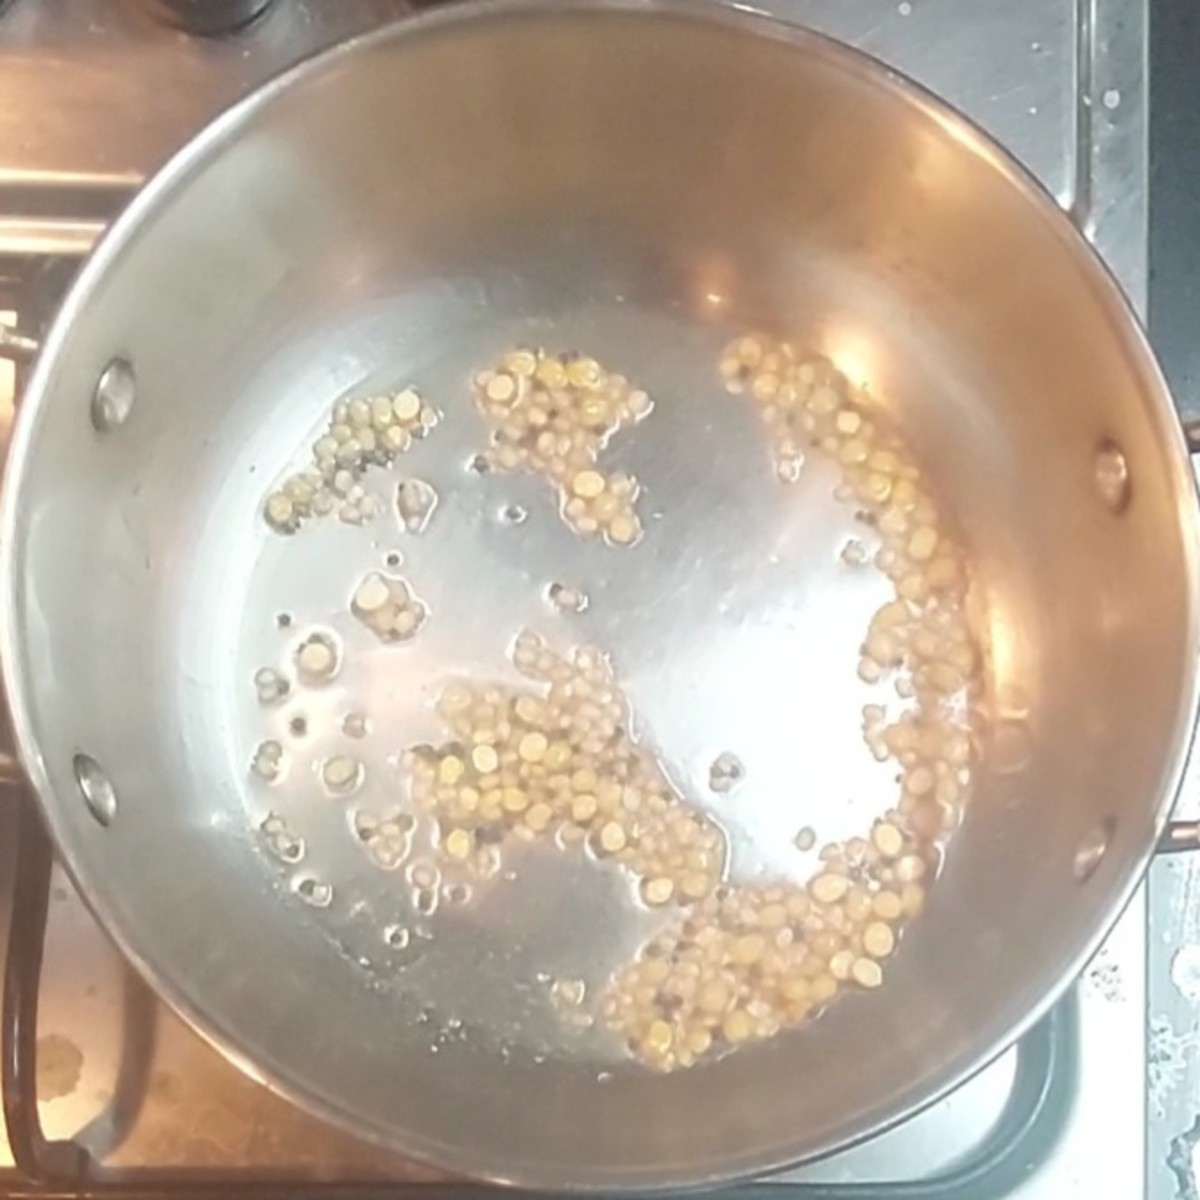 In a frying pan, heat 1 tablespoon oil and splutter 1/2 teaspoon mustard seeds. Add 1 teaspoon urad dal and 1 teaspoon chana dal. Saute for a few seconds. Add hing and saute till lentils turn golden brown.